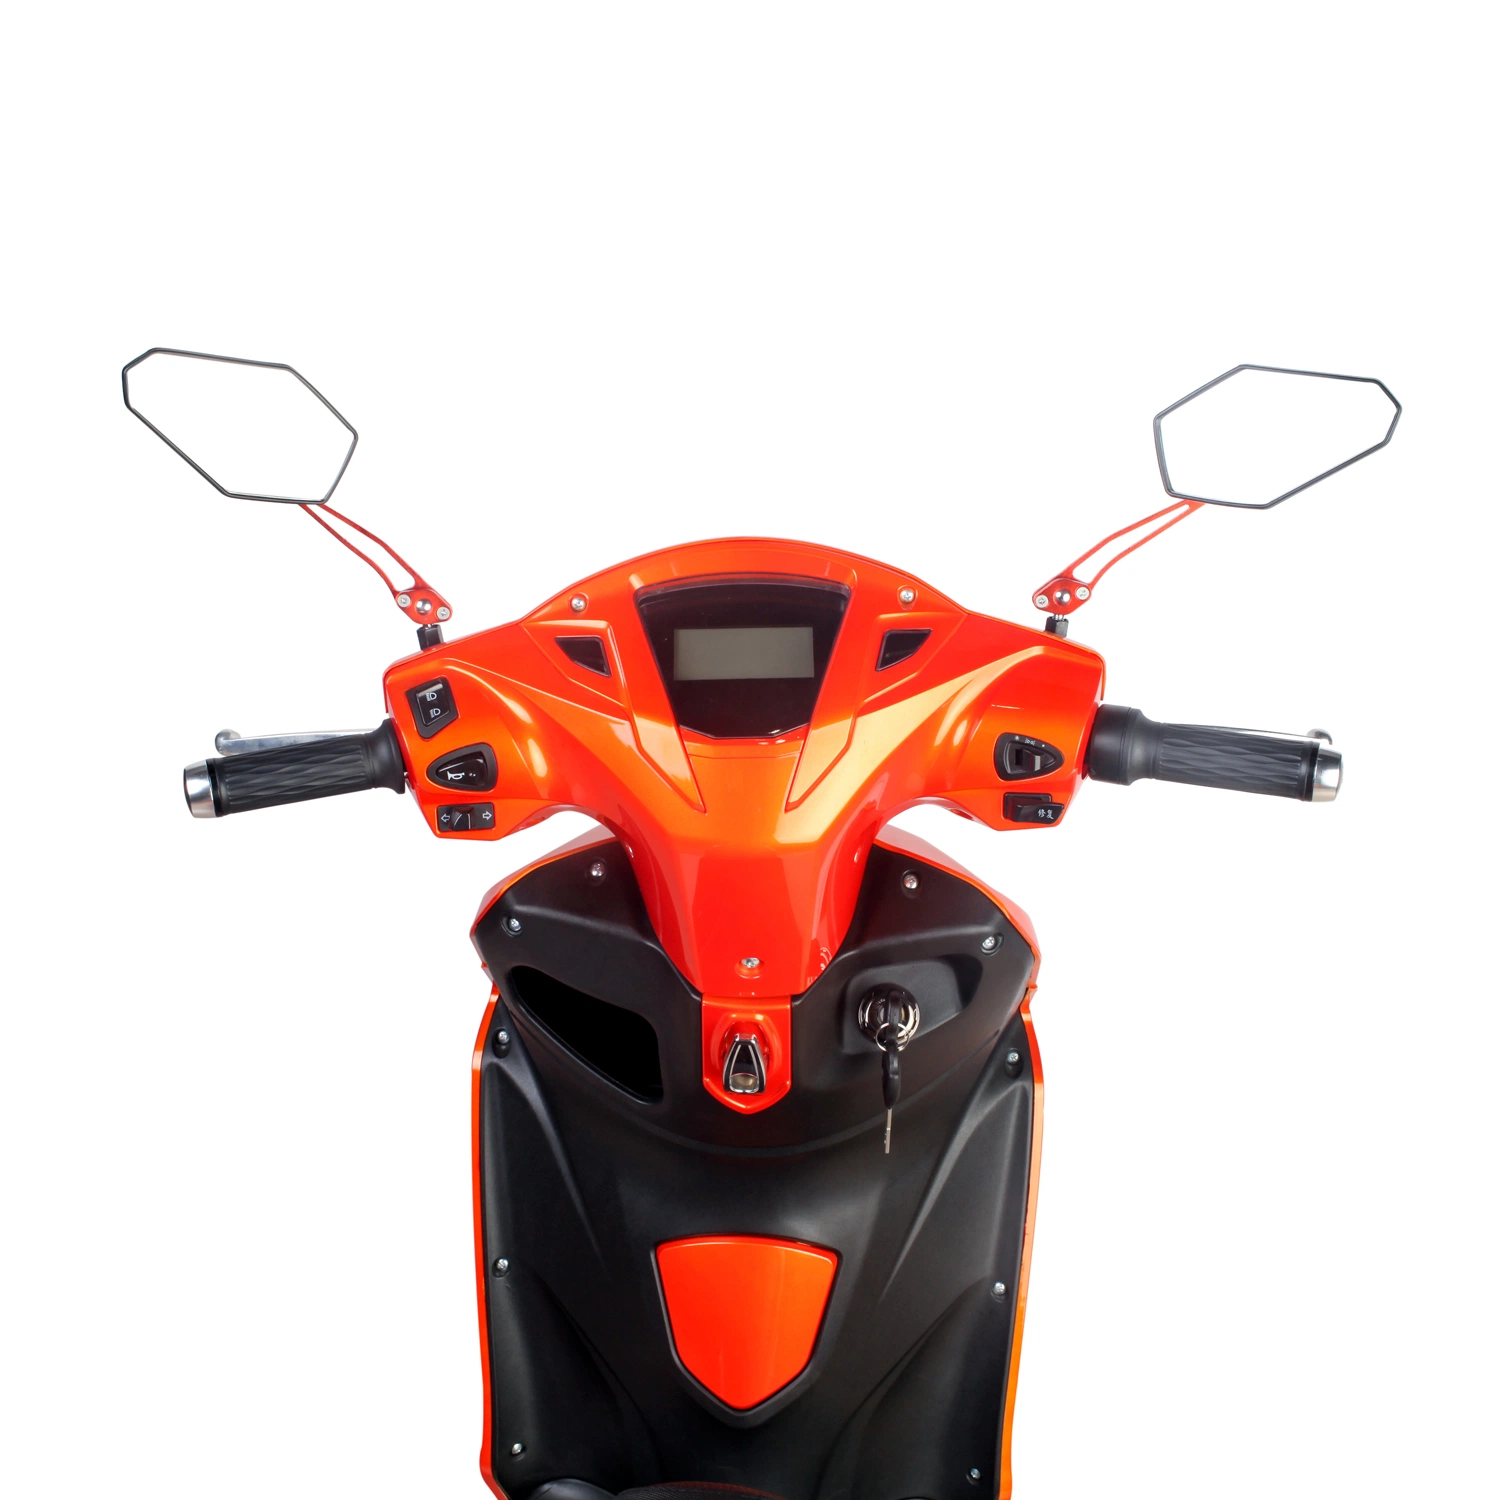 2000W Powerful Electrical Motorcycle / Electric Scooter / Electric Bicycle (TY)